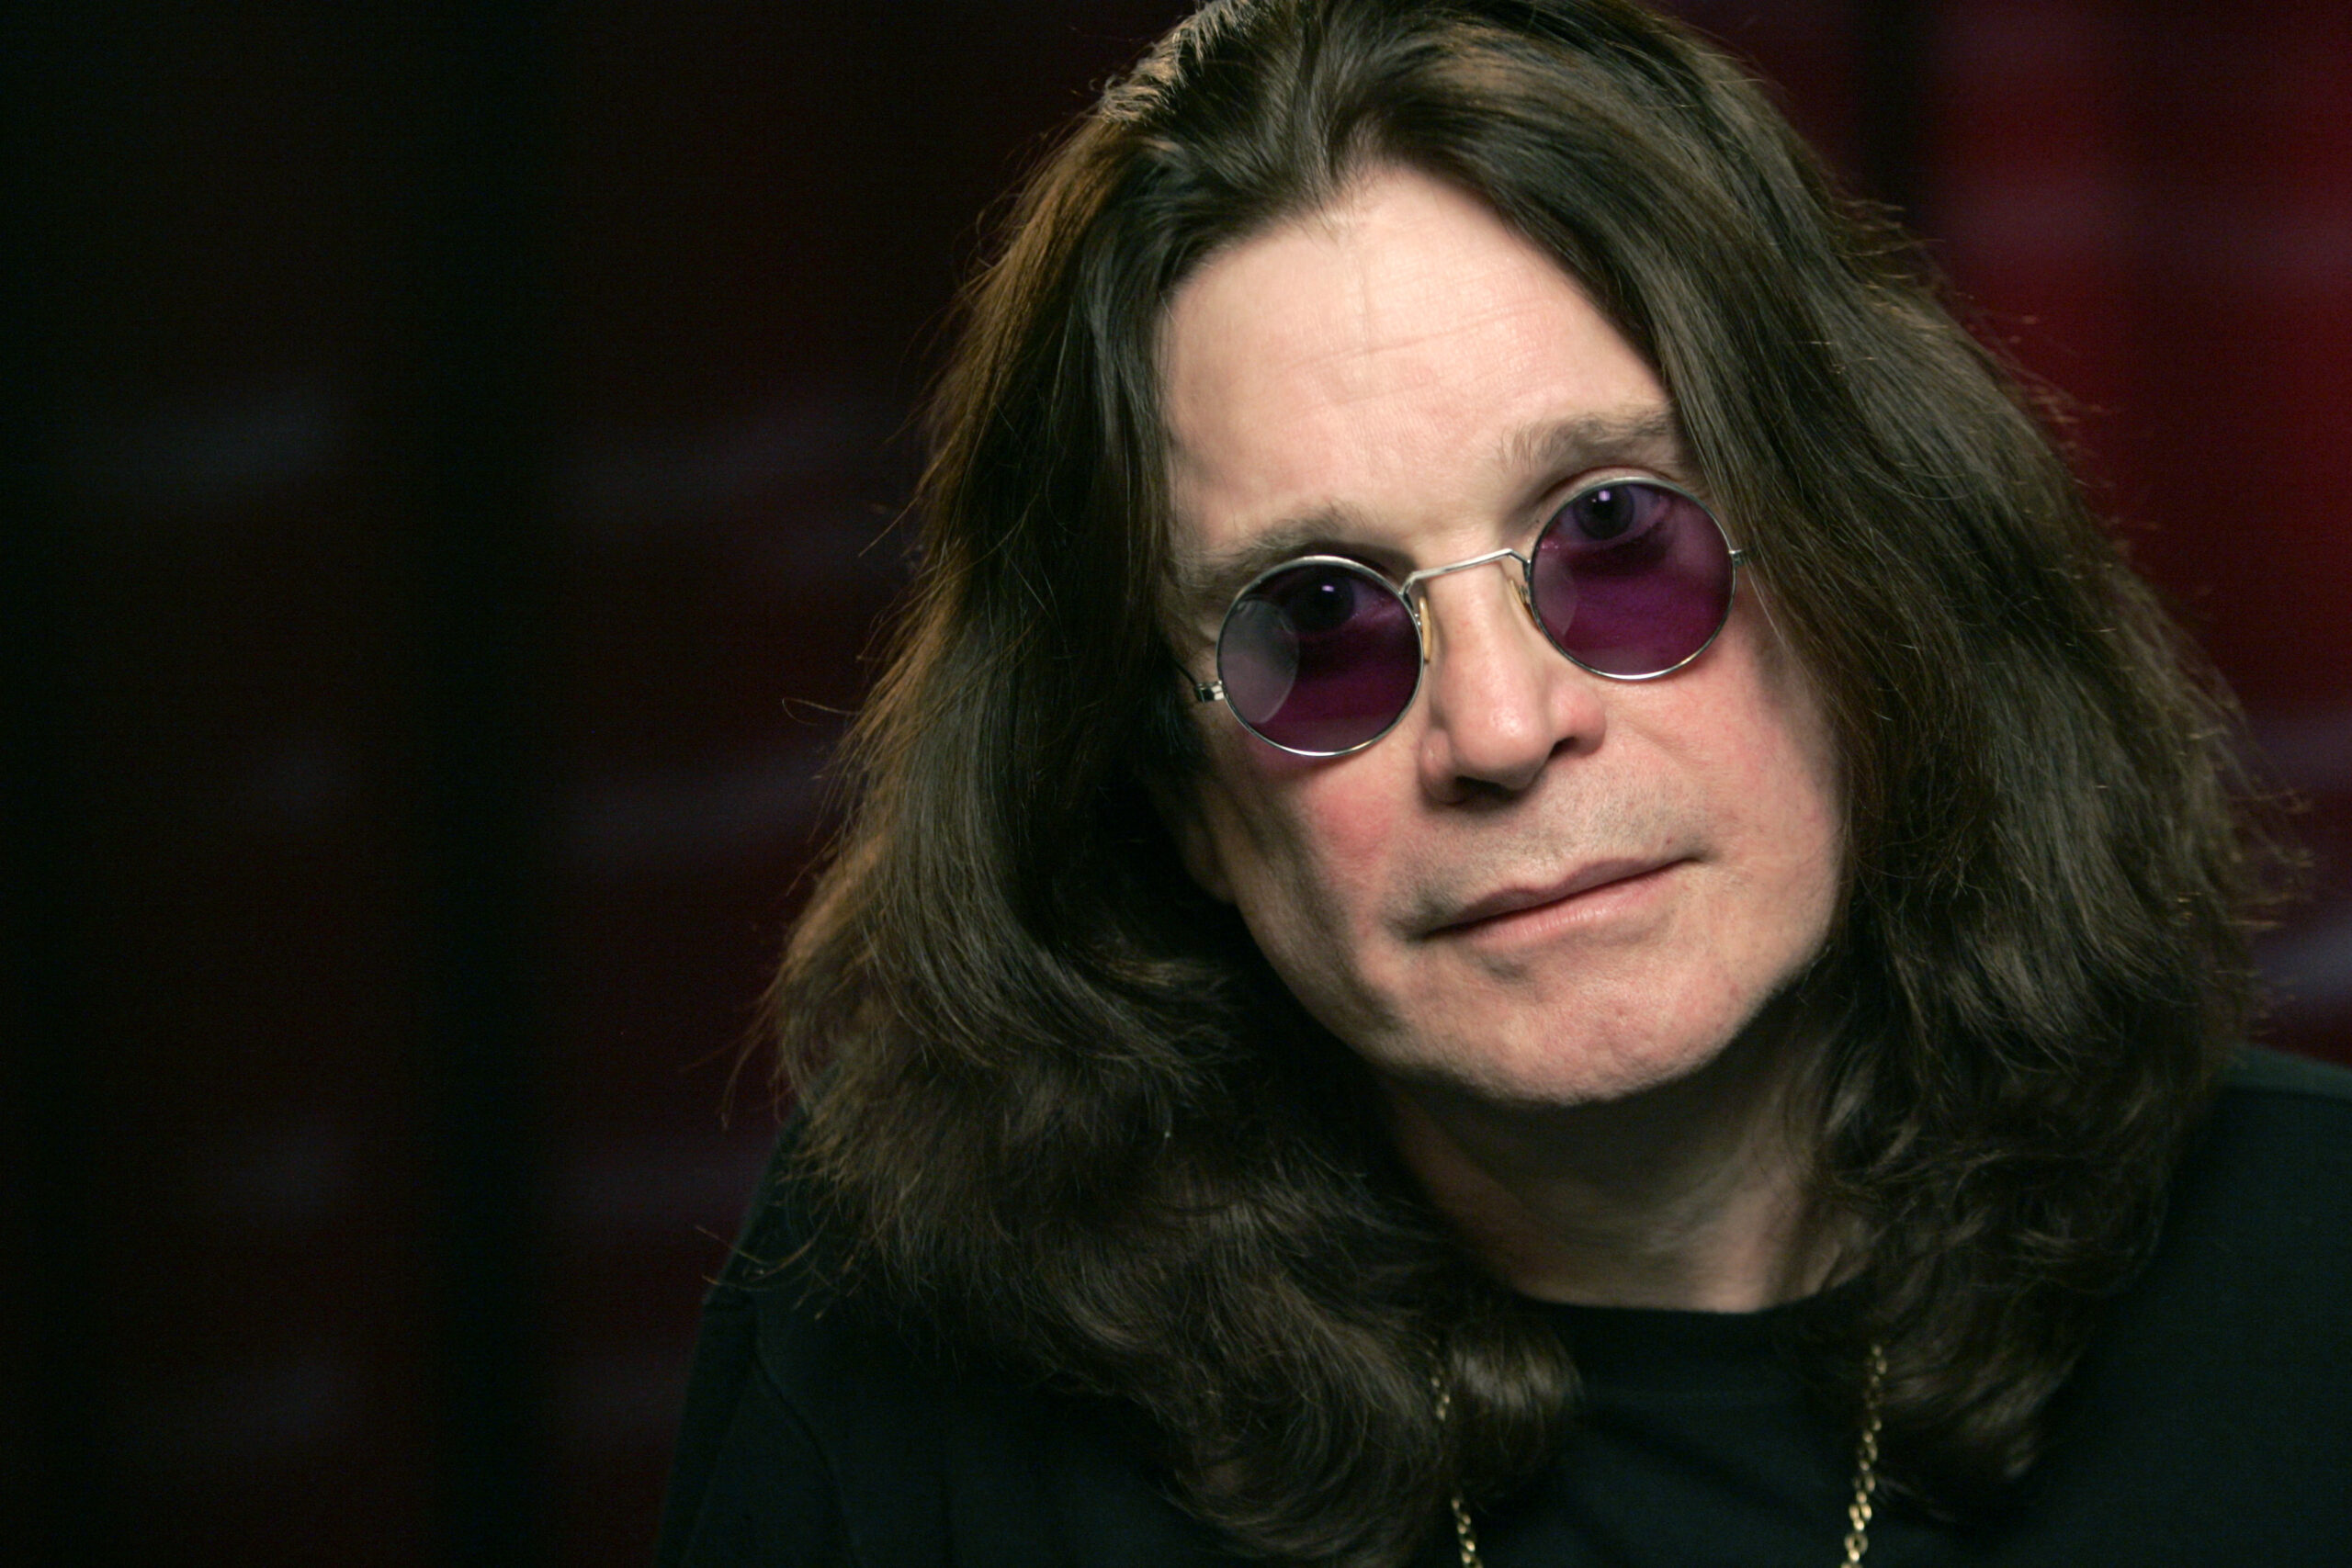 Ozzy Osbourne Accuses ‘ANTISEMITE’ Kanye West Of Sampling His Music Without Permission: ‘I WANT NO ASSOCIATION WITH THIS MAN!’